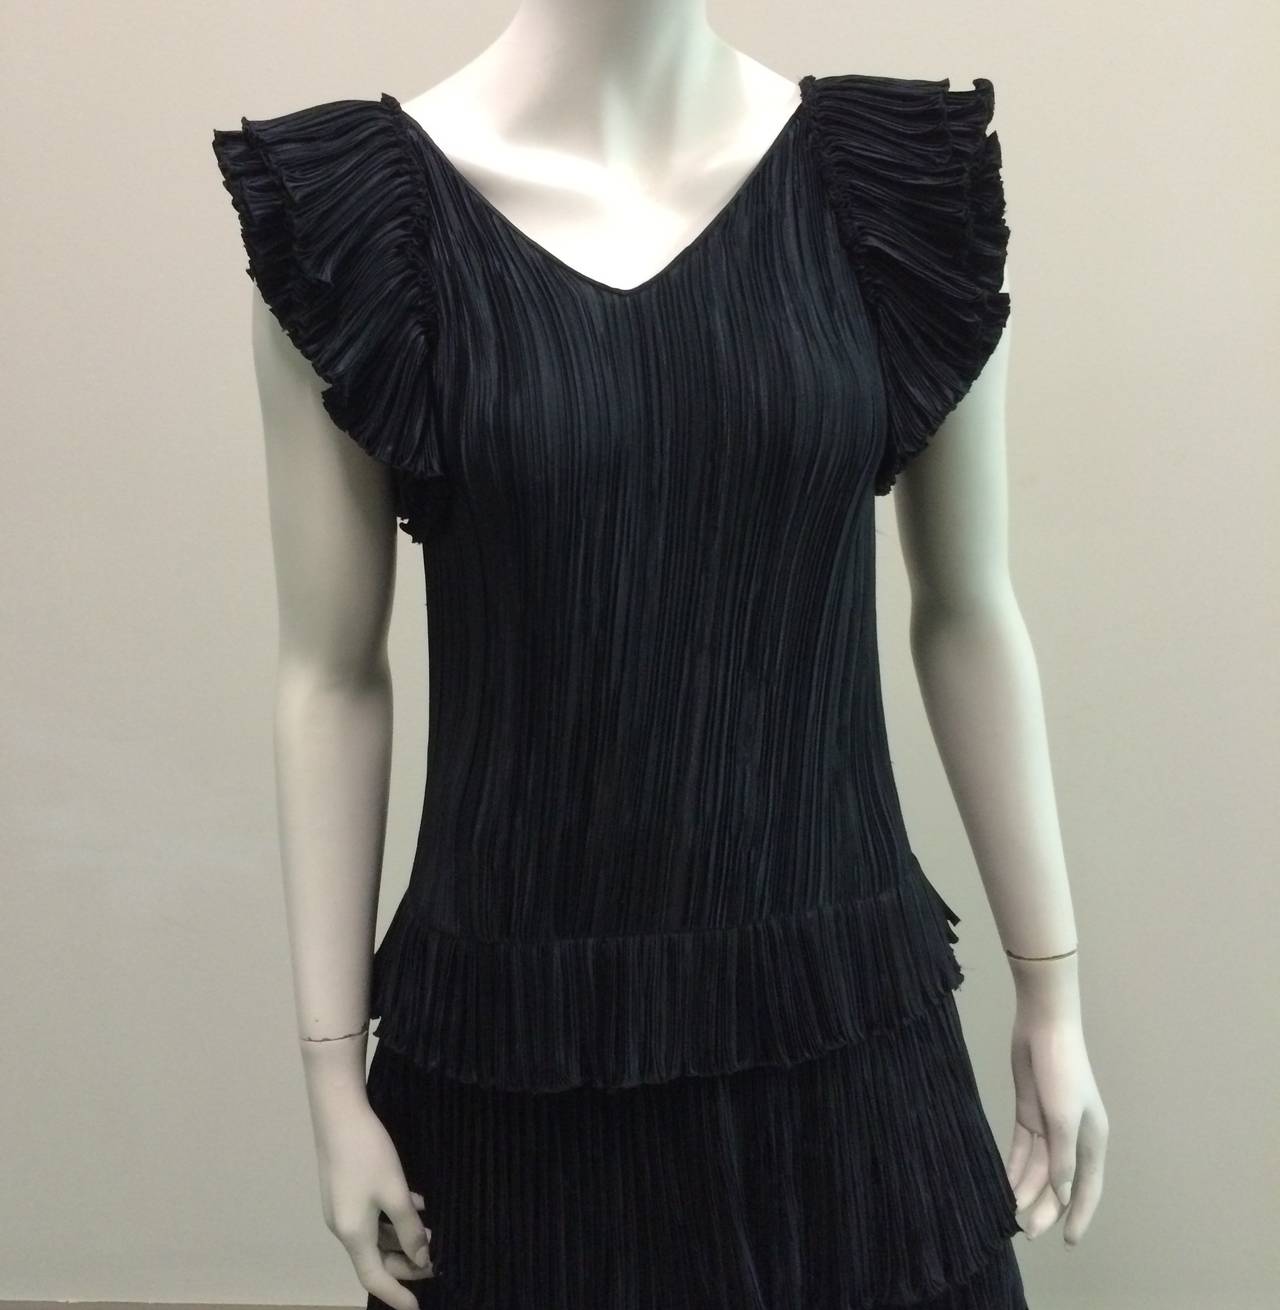 This Mary McFadden 1980s black pleated layered cocktail dress size 4. Ladies please grab your tape measure so you can properly measure your bust, waist & hips to make certain this will fit your lovely body. Dress purchased at Neiman Marcus in